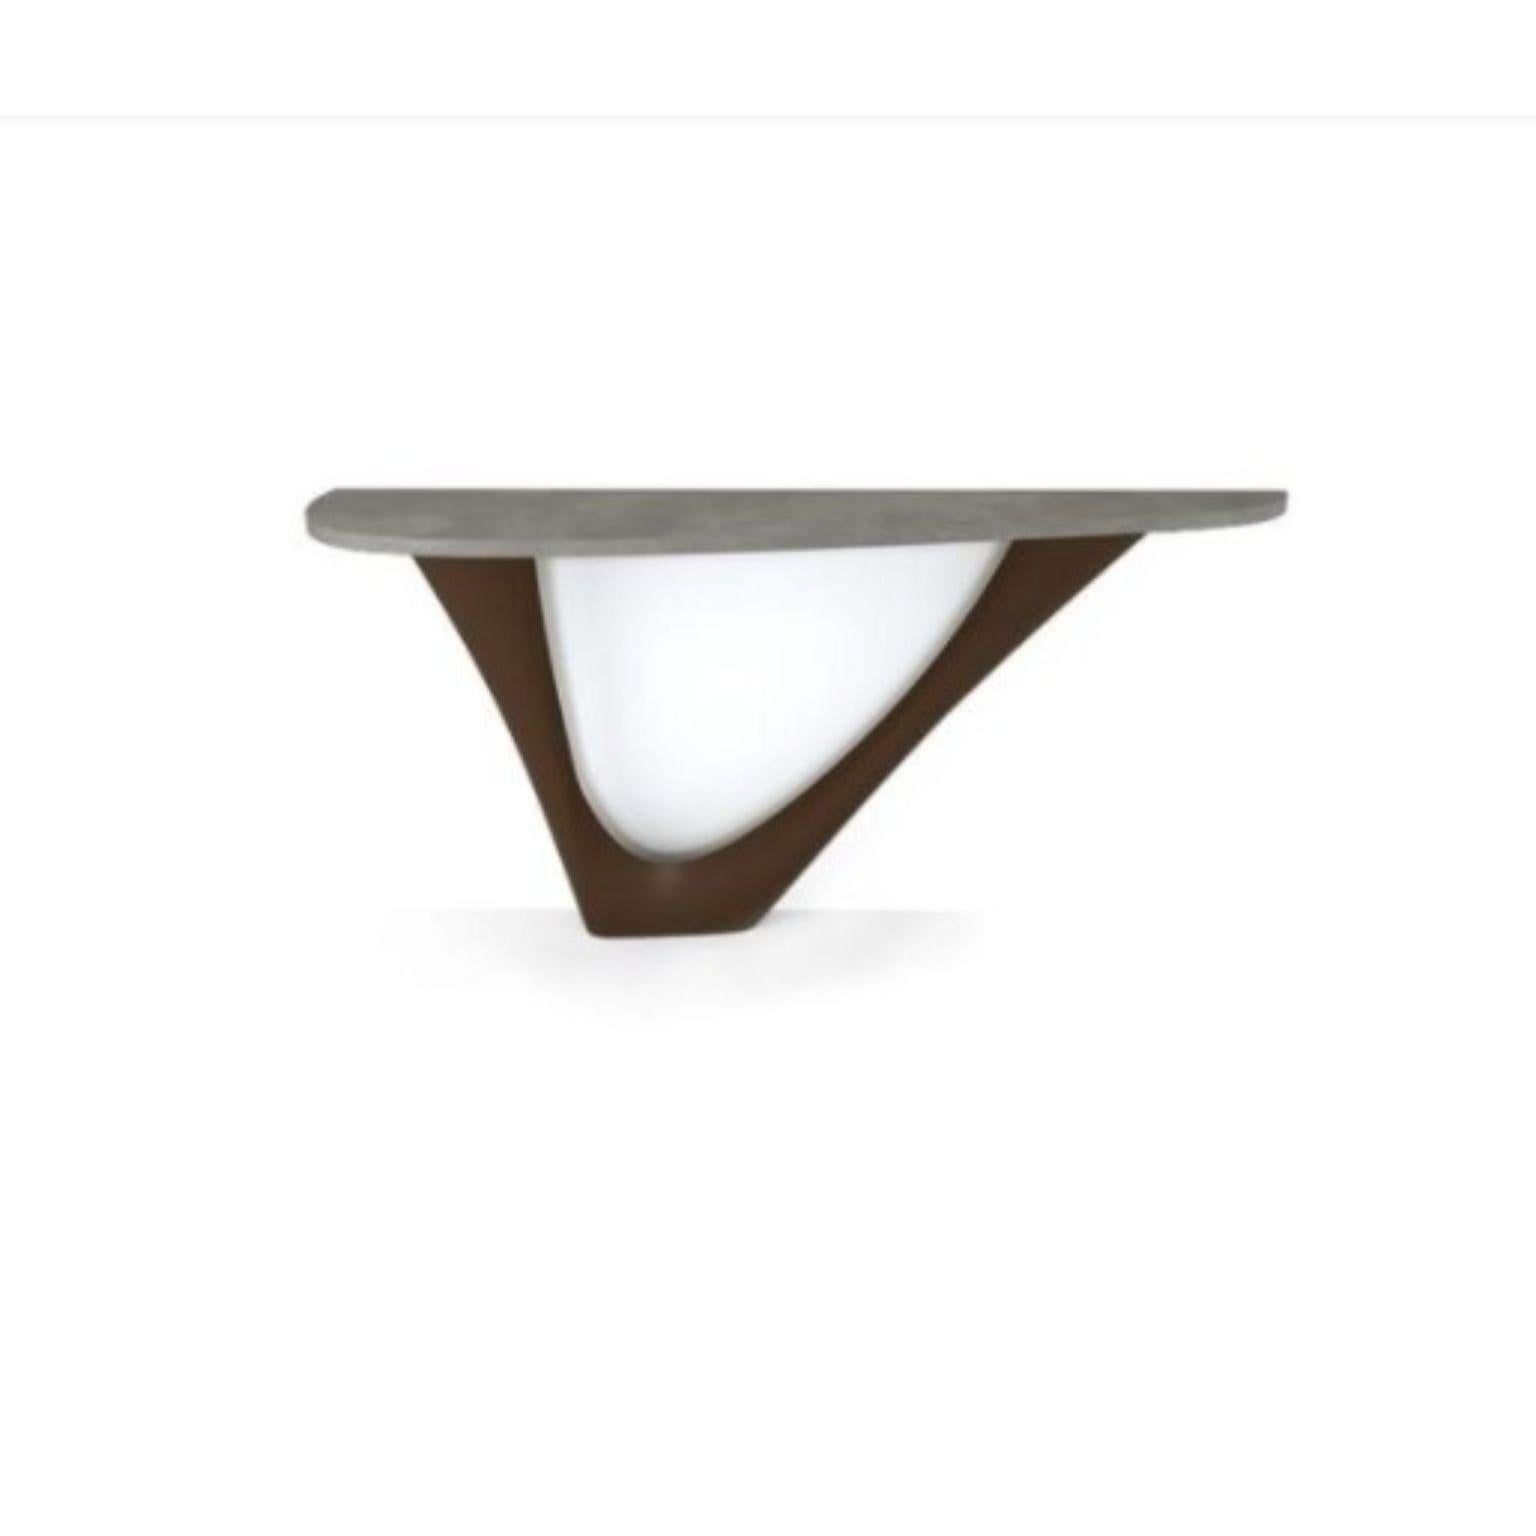 Brown G-Console mono steel base with concrete top by Zieta
Dimensions: D 43 x W 159 x H 75 cm 
Material: Concrete, carbon steel.
Also available in different colors and dimensions.

G-Console is another bionic object in our collection. Created for